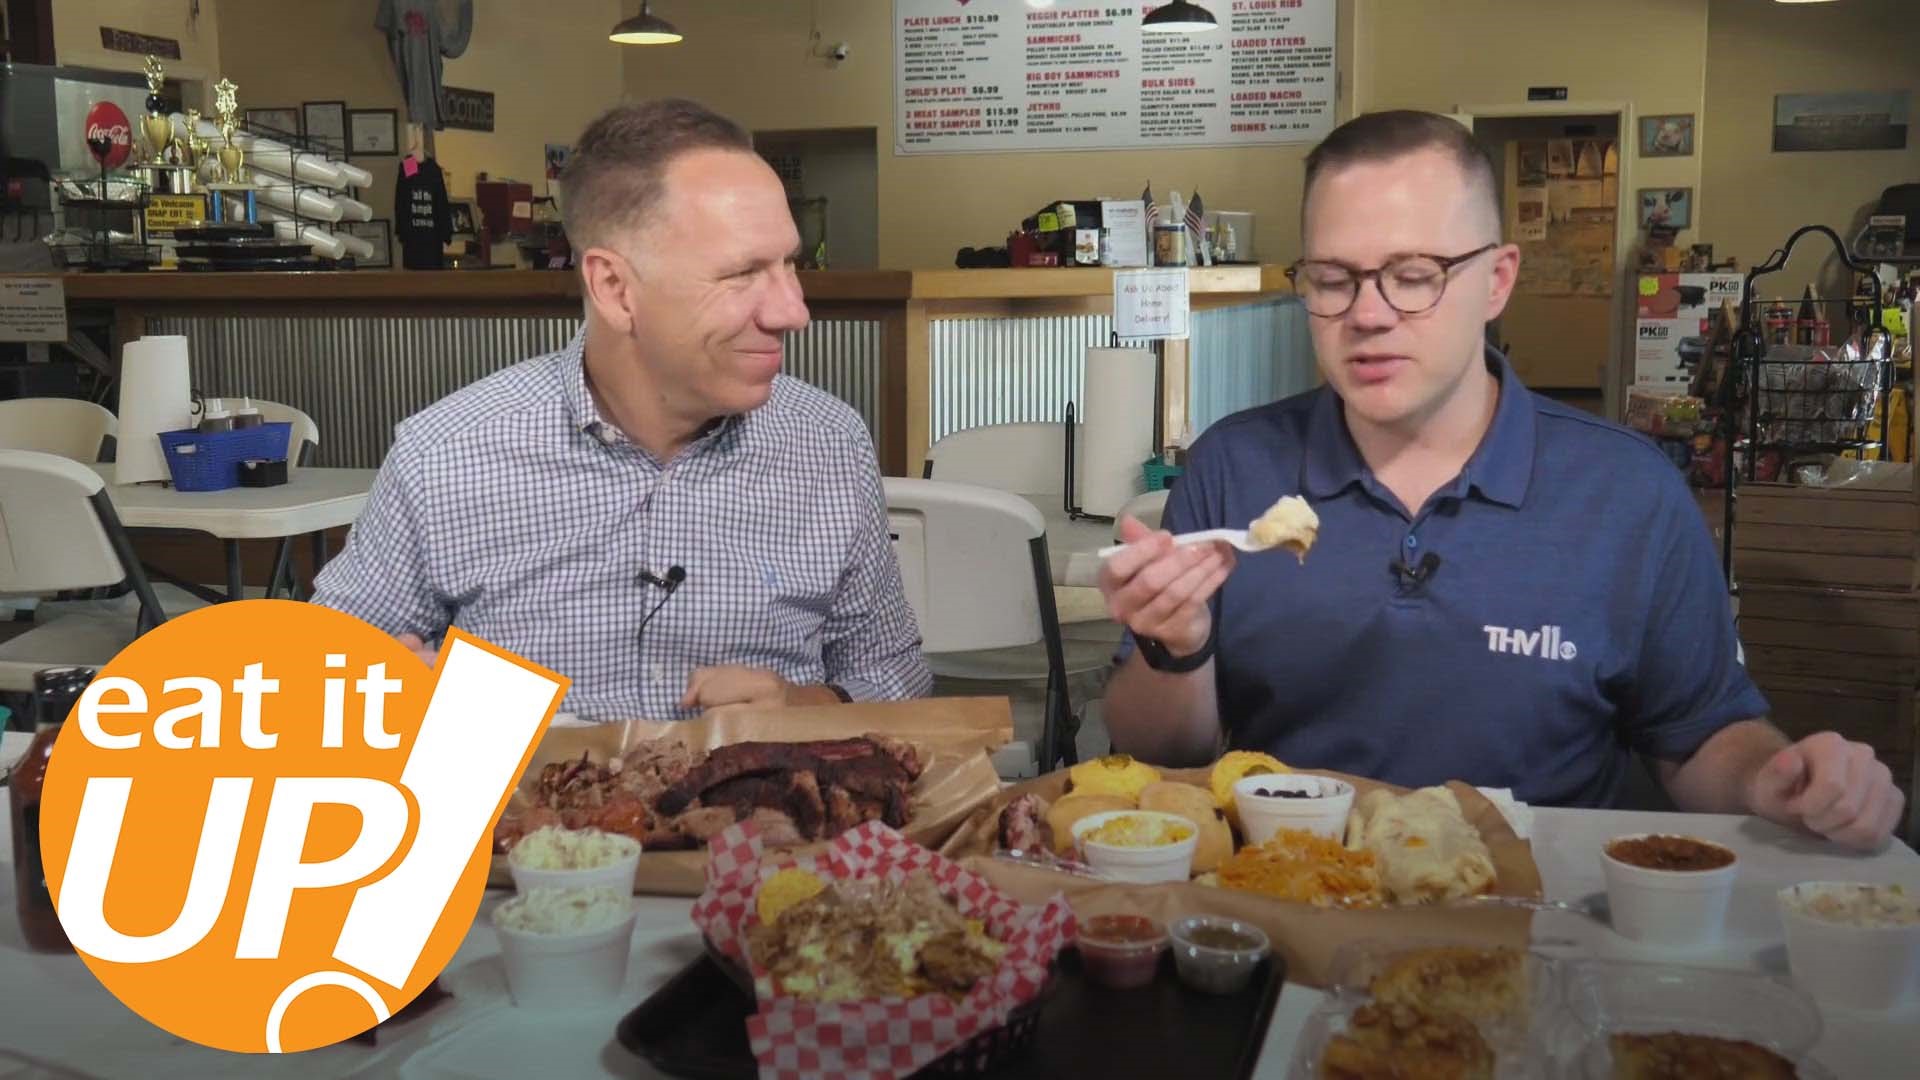 On this week's Eat It Up, Skot Covert & Rolly Hoyt visit Clampit's Country Kitchen in Hot Springs Village, a delicious barbeque destination beloved by the community.